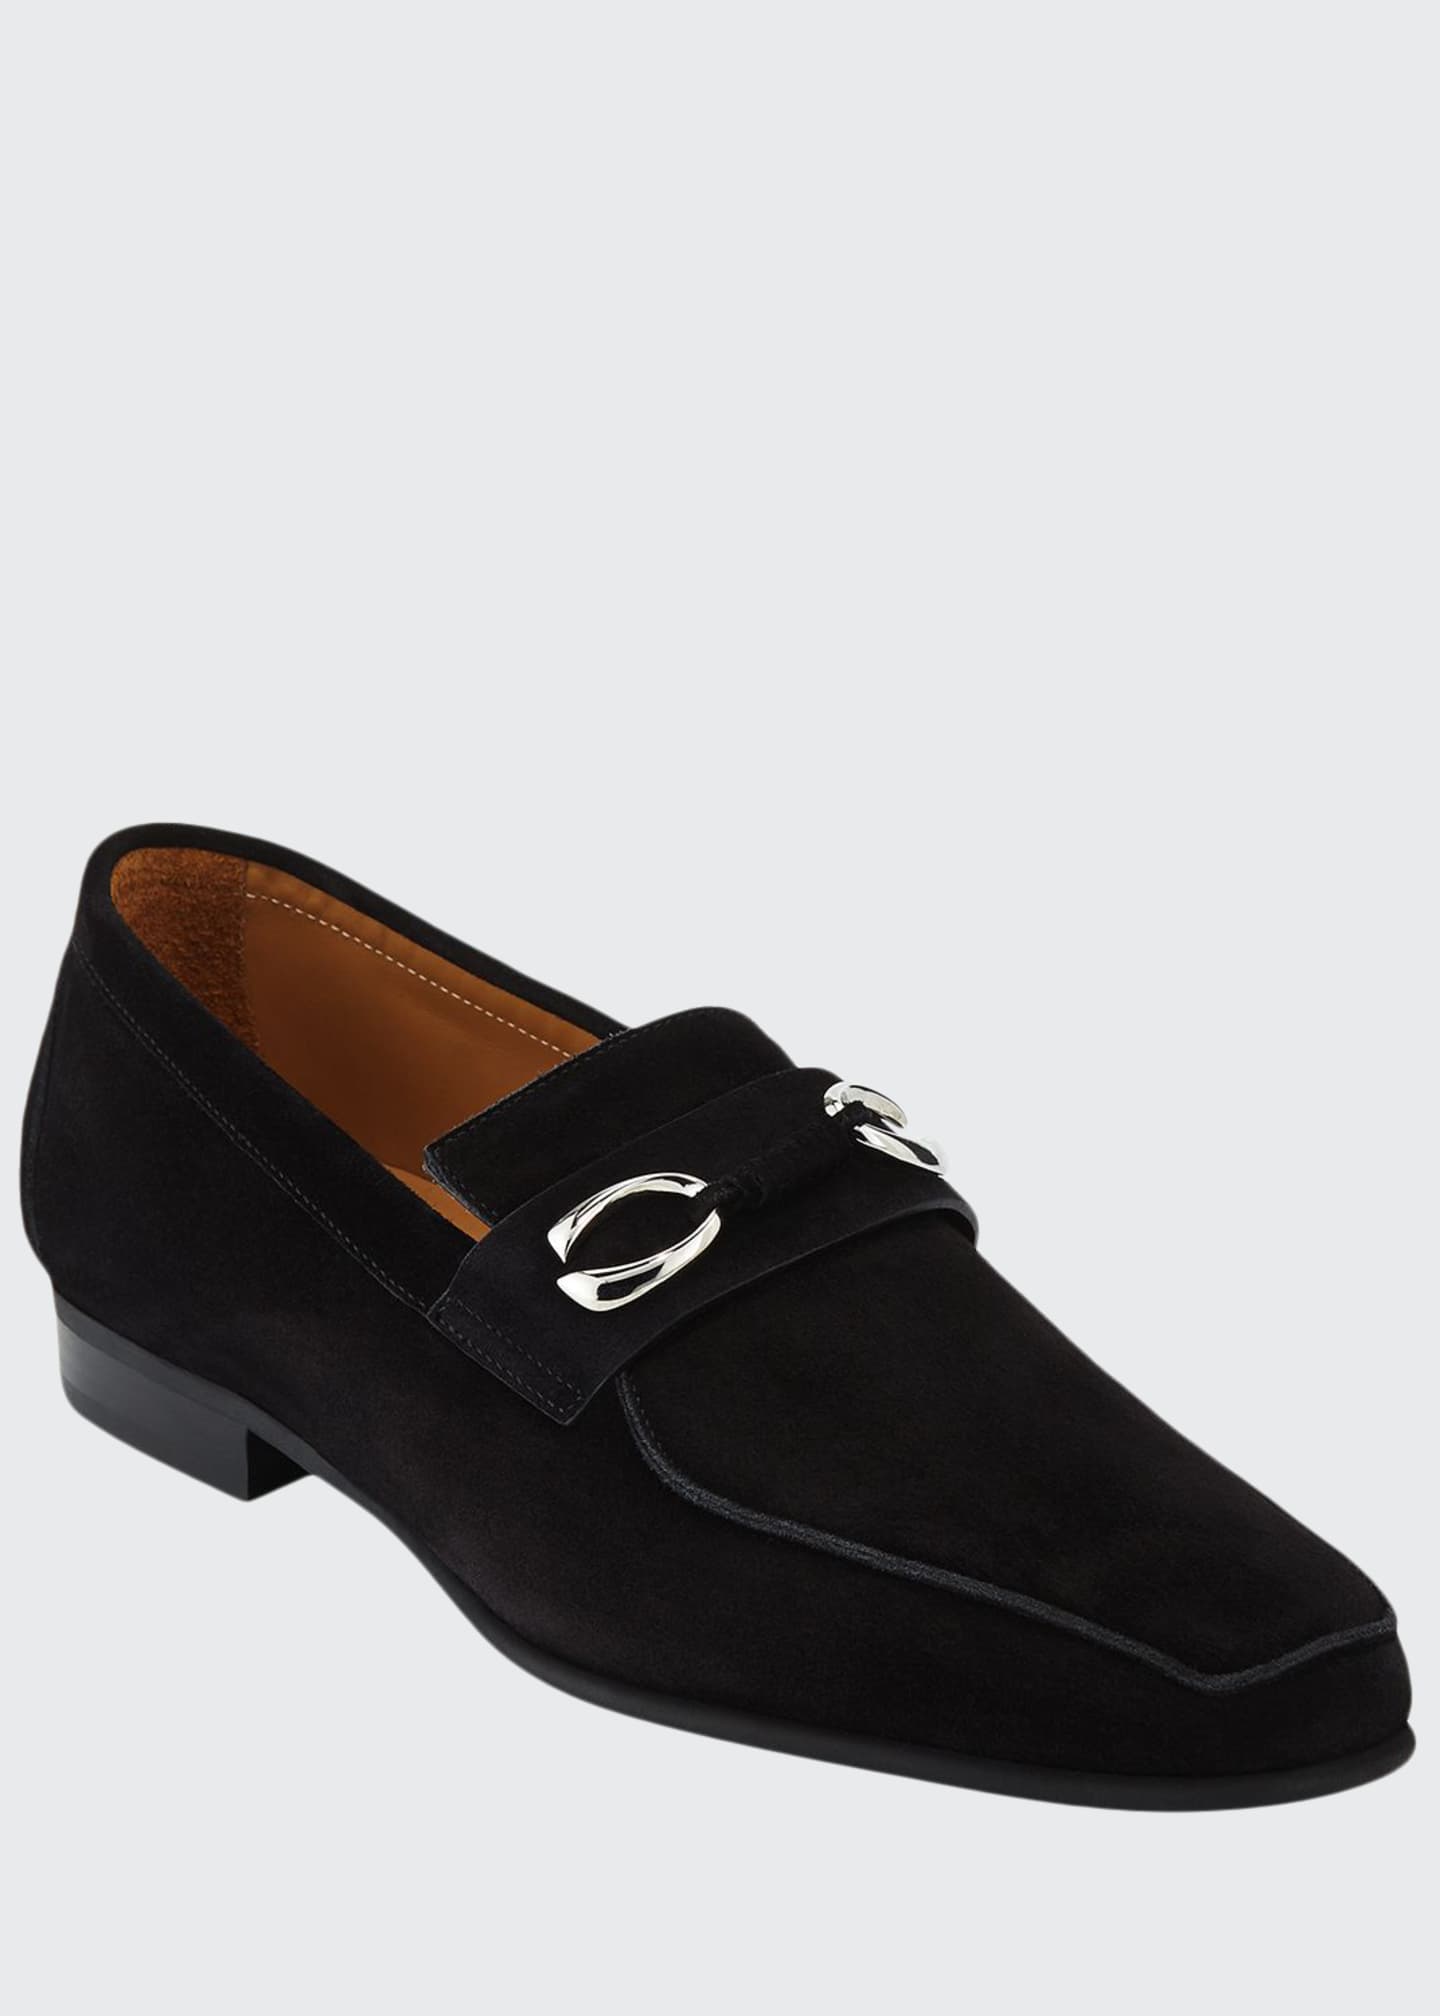 Corthay Men's Cannes Suede Loafers with Bit Detail - Bergdorf Goodman